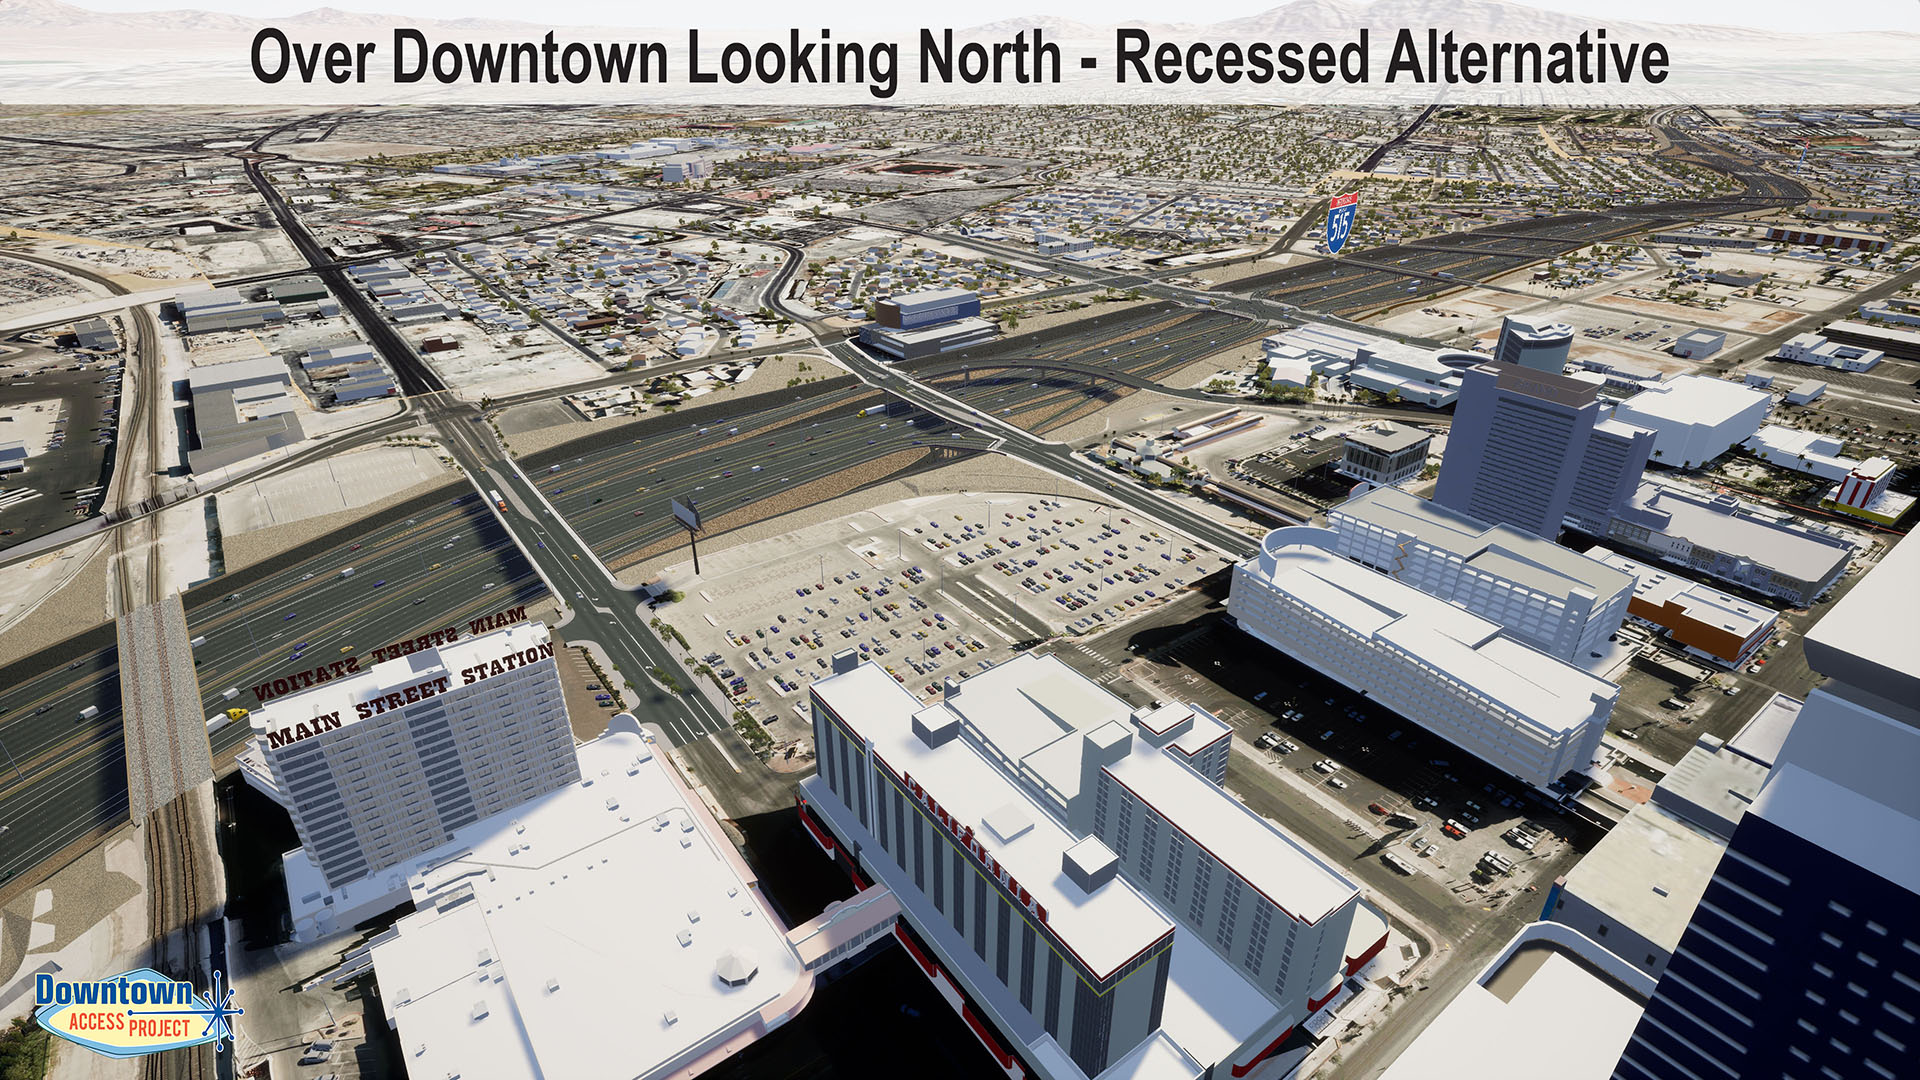 Over Downtown Looking North - Recessed Alternative